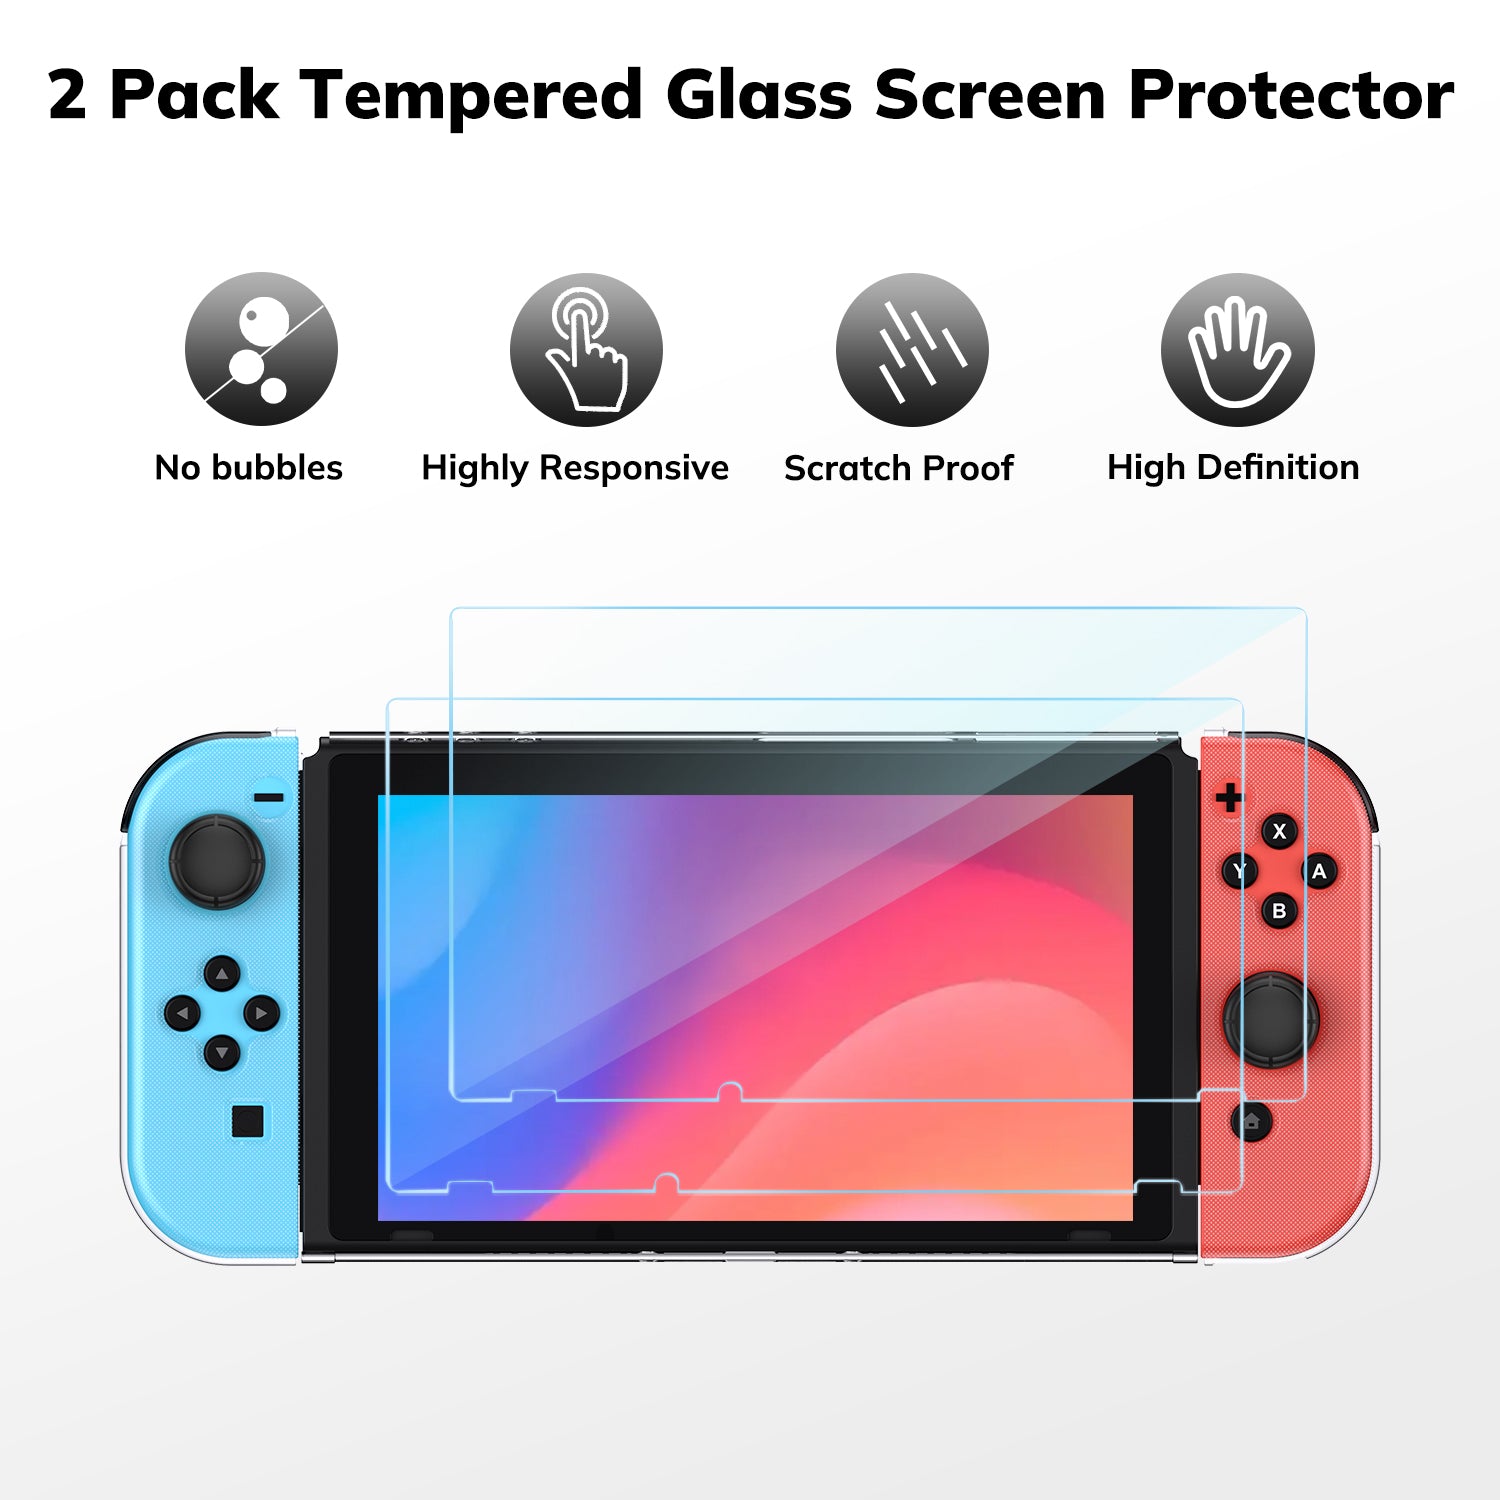 Younik Y Design Nintendo Switch Carrying Case, Case for Switch, Thumb Grips Included